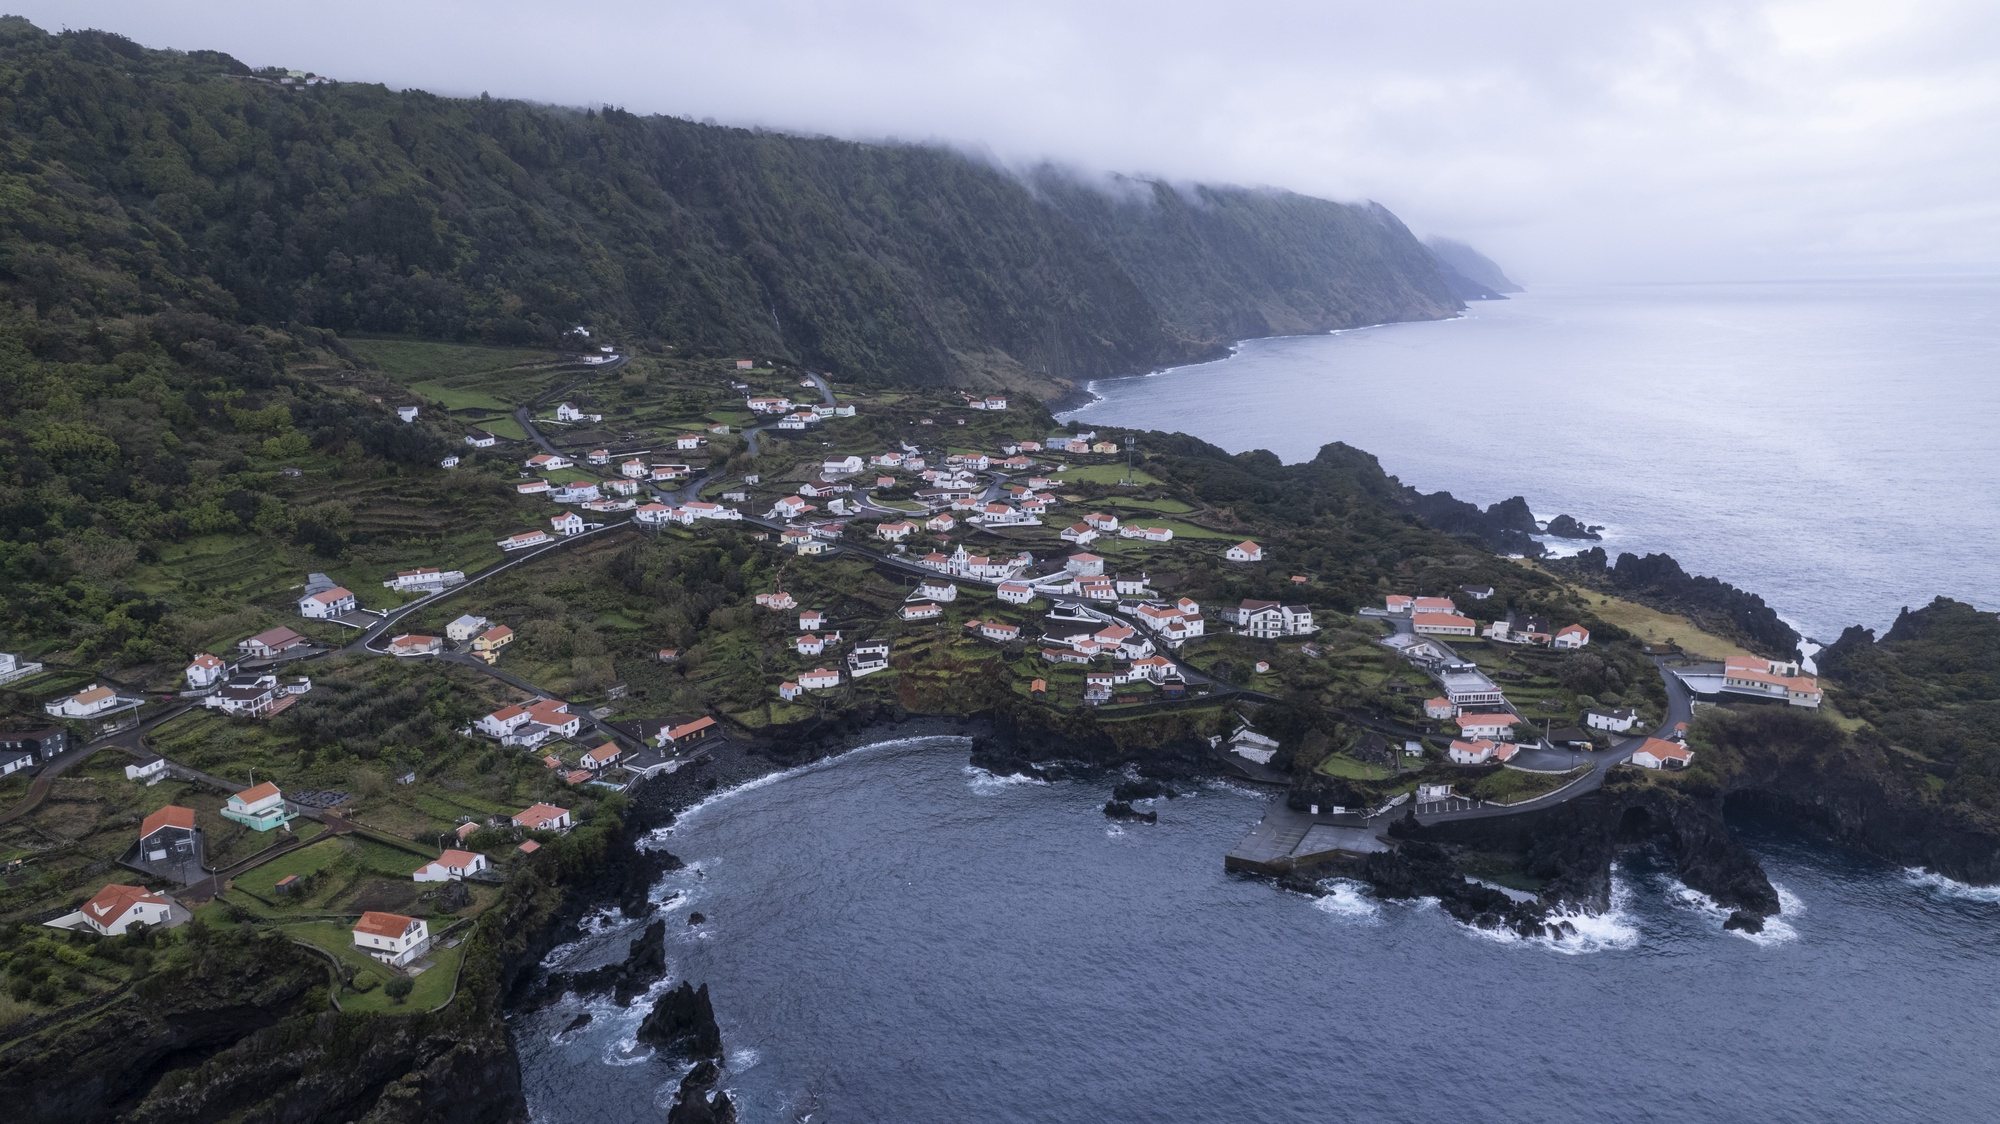 Faja dos Cubres at Concelho de Velas, Sao Jorge island, Azores, Portugal, 26 March 2022. The island of Sao Jorge has counted about 12,700 earthquakes since 19th March, more than double all those recorded in the Azores archipelago since 2021. ANTONIO ARAUJO/LUSA